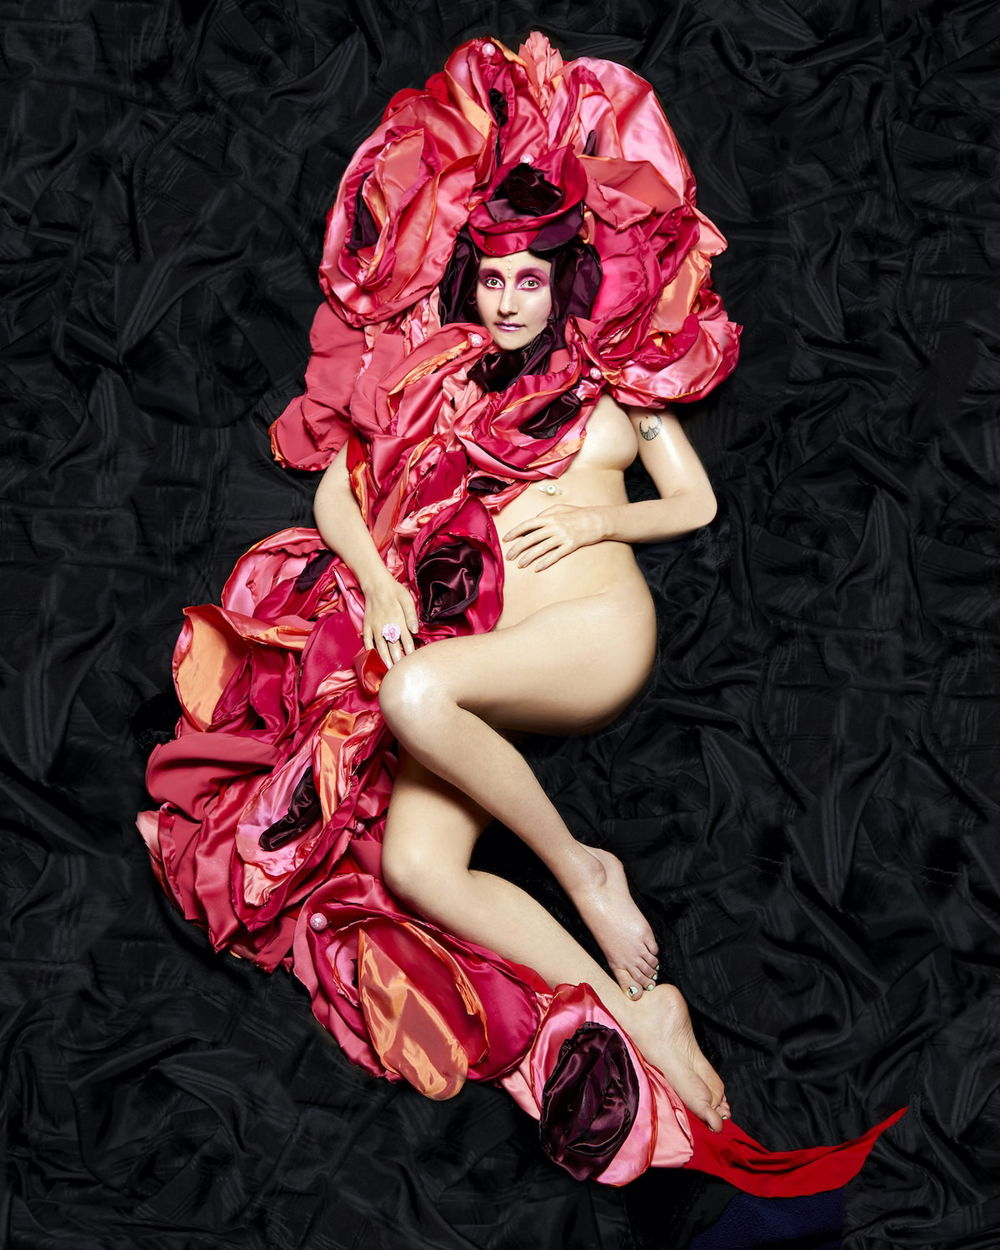 A nude White woman luxuriates on a background of black fabric. The left side of her torso is engulfed in the deep folds of pink fabric that circle around her head and is tucked under her bent knees.